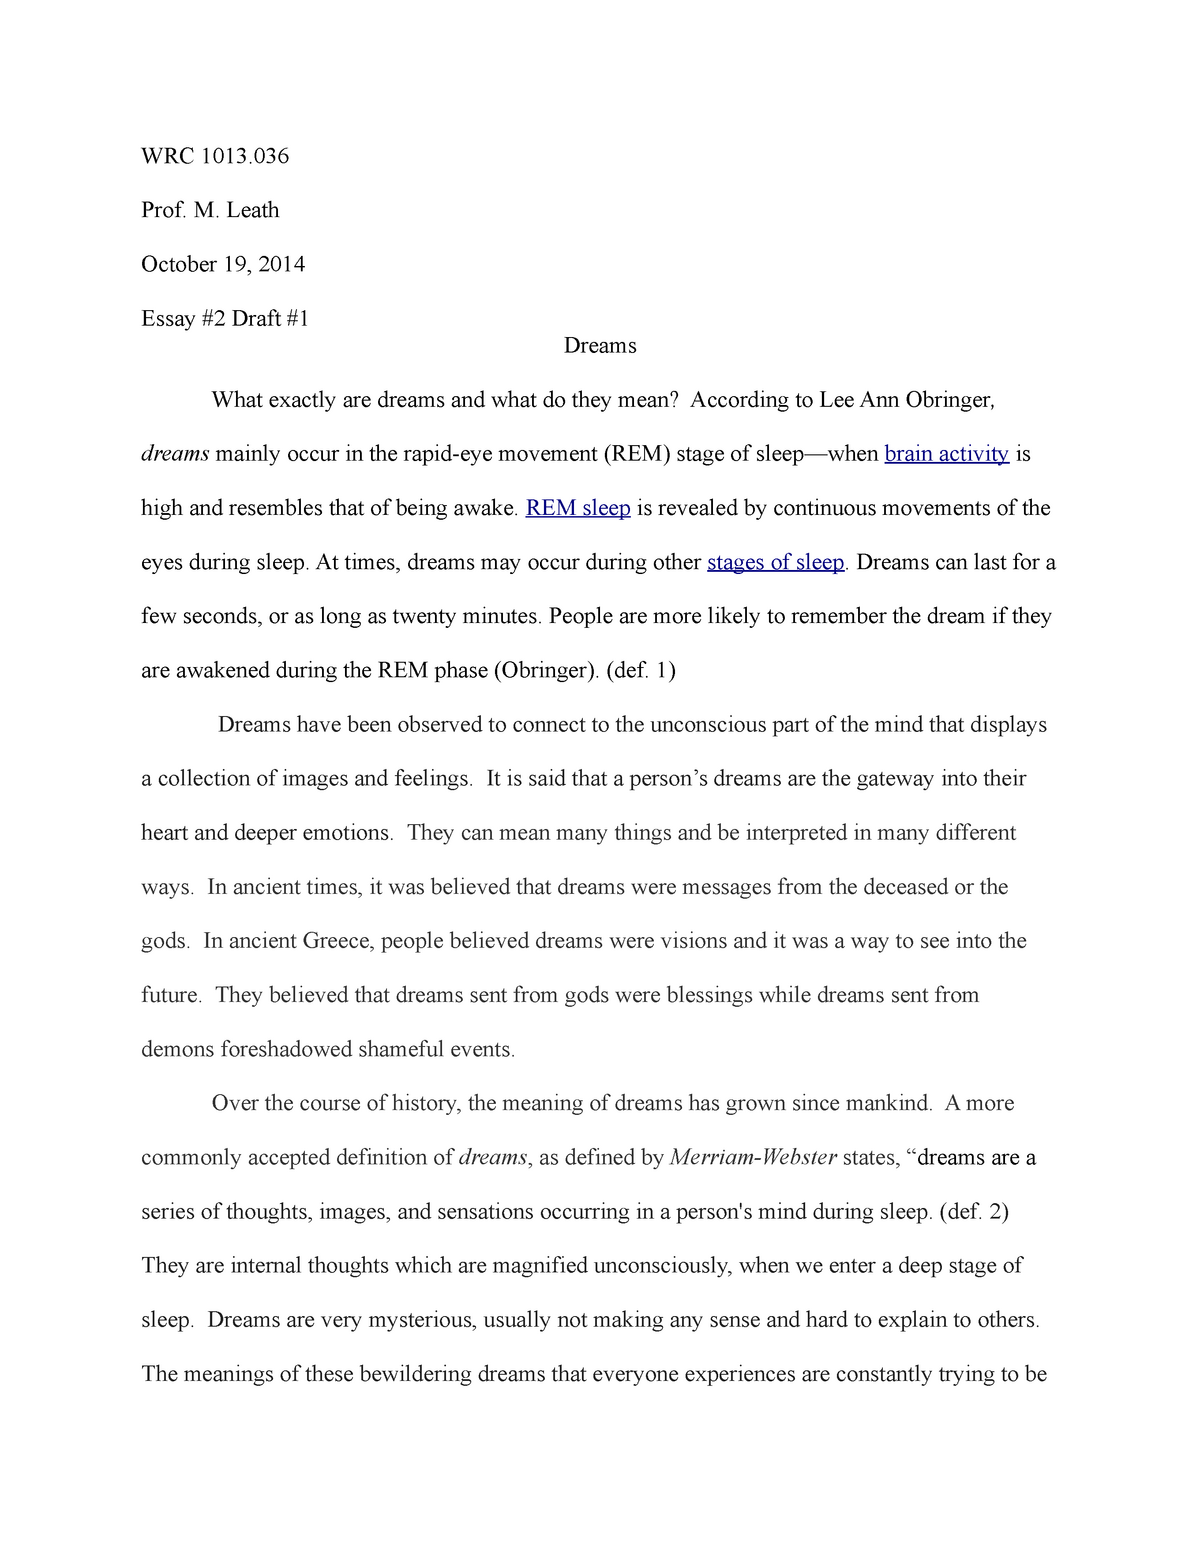 extended definition essay